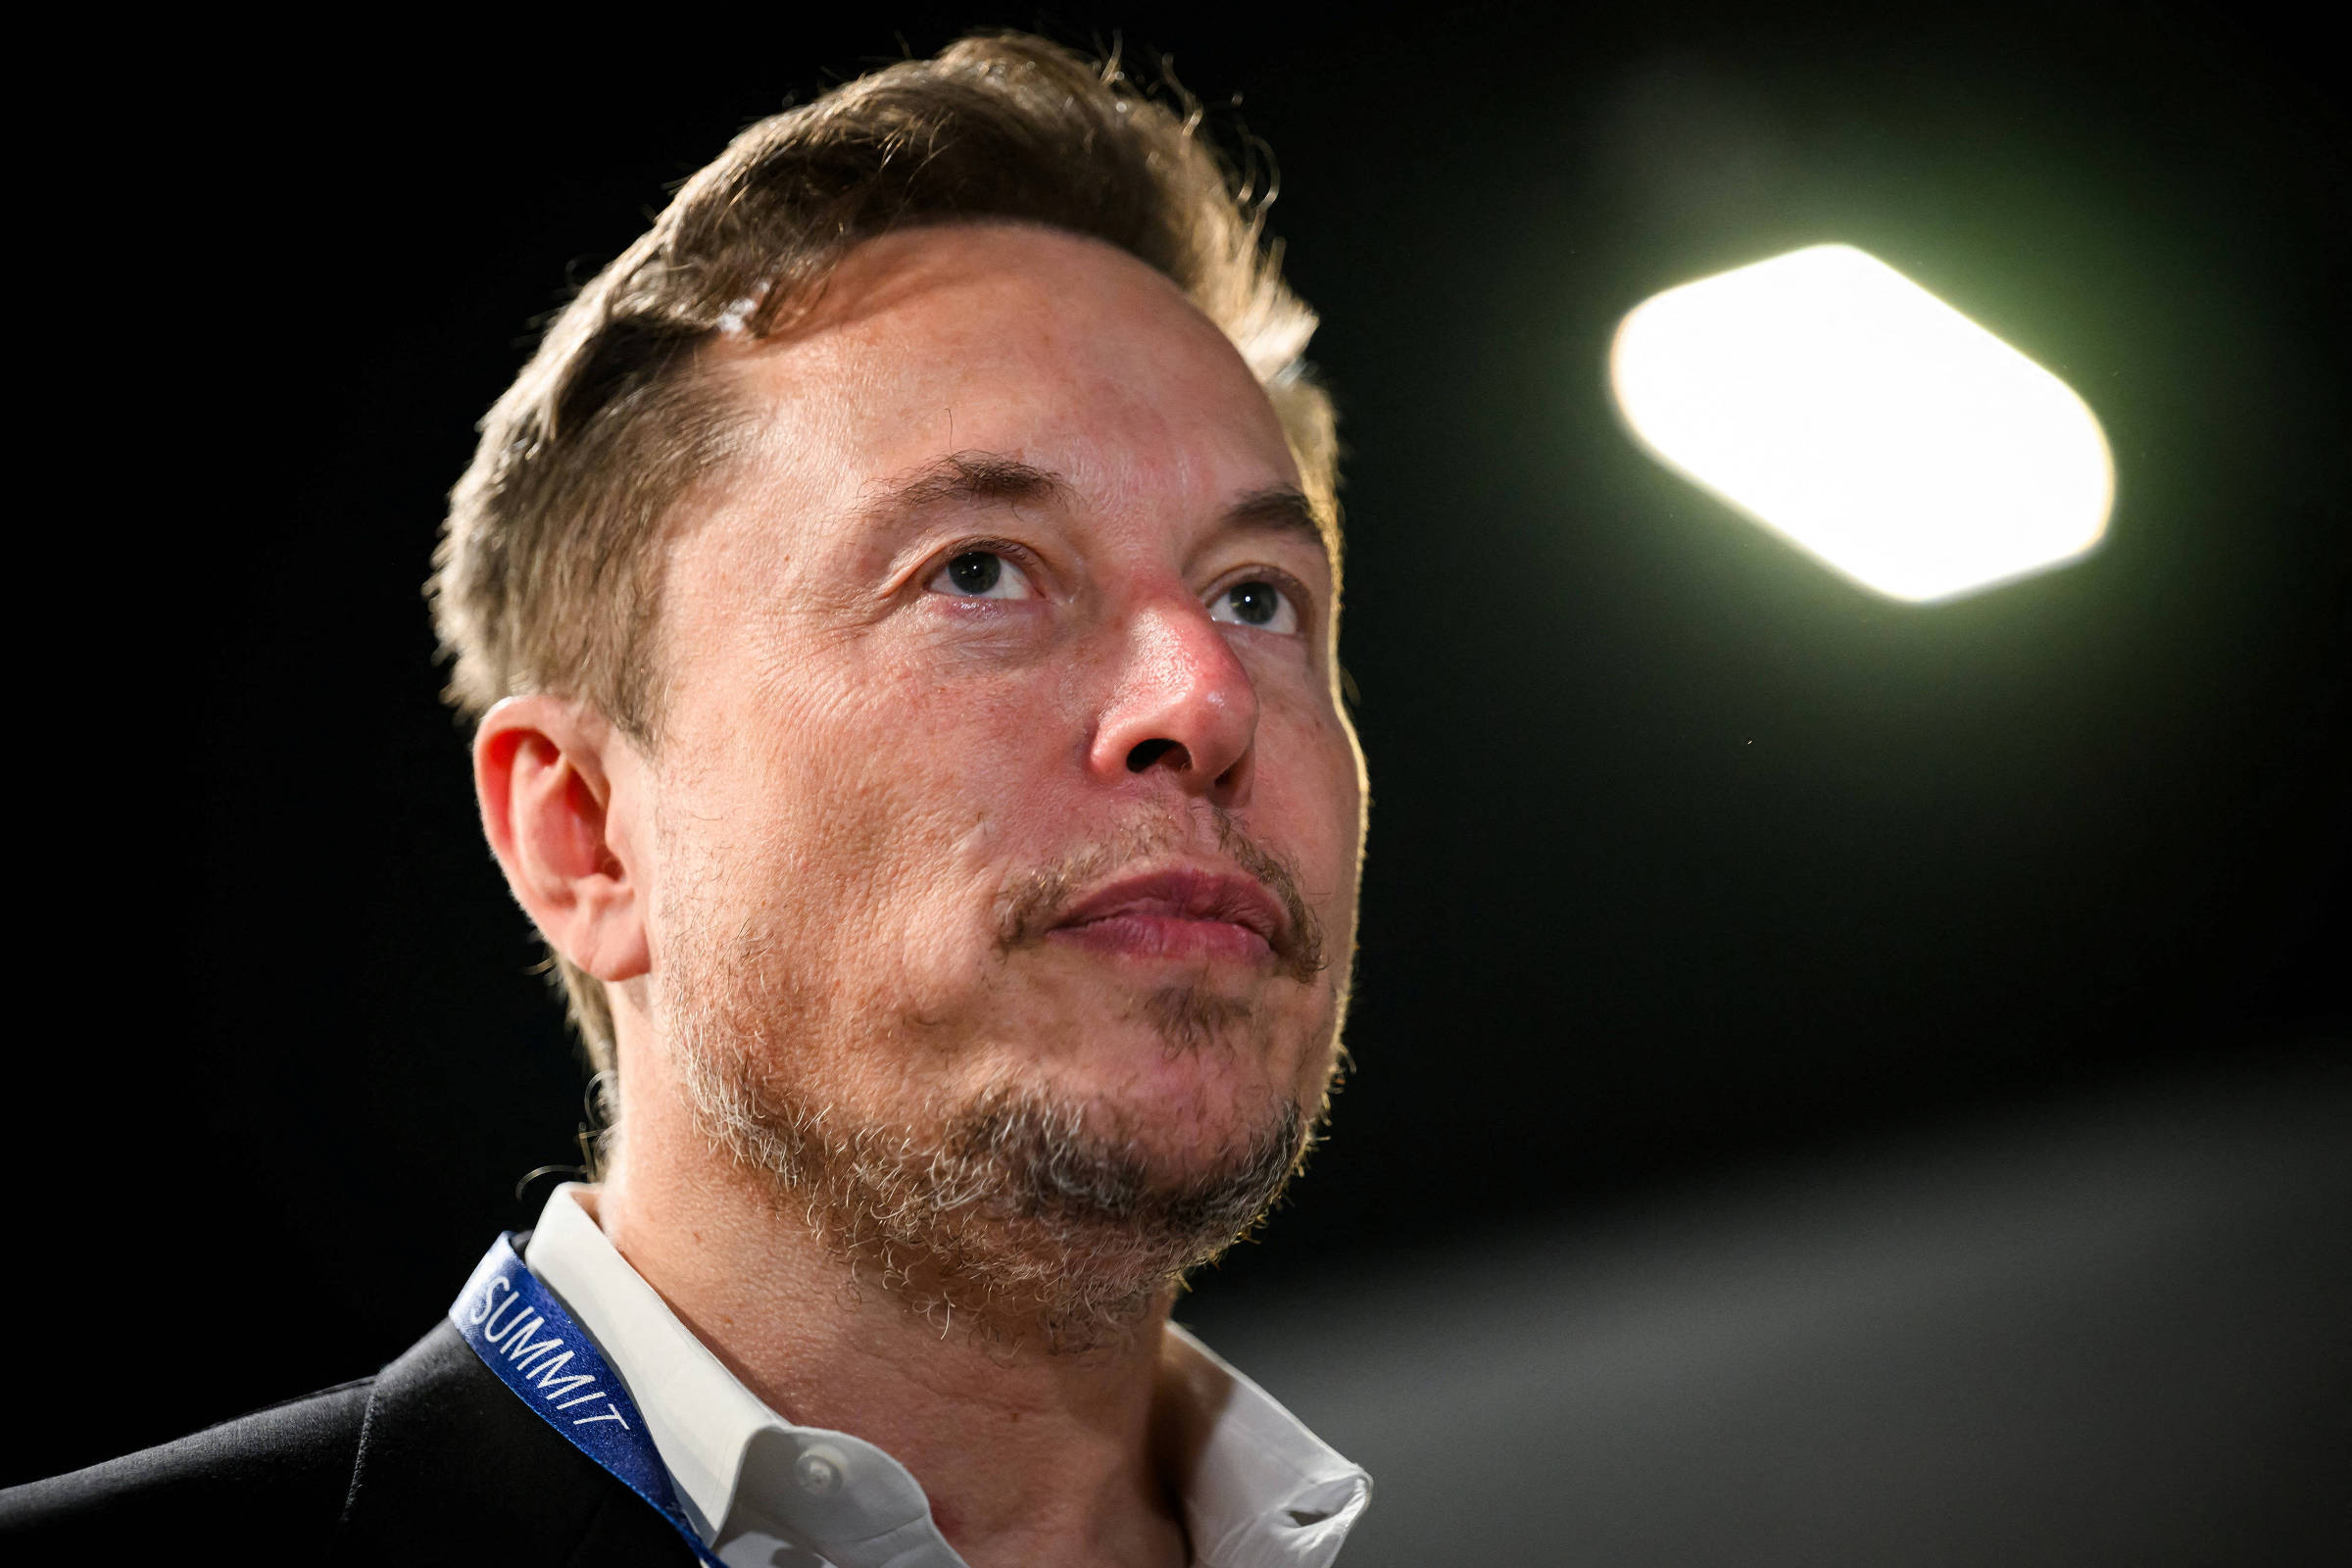 Elon Musk: If artificial intelligence is left to environmentalists, it could lead to the extinction of humanity